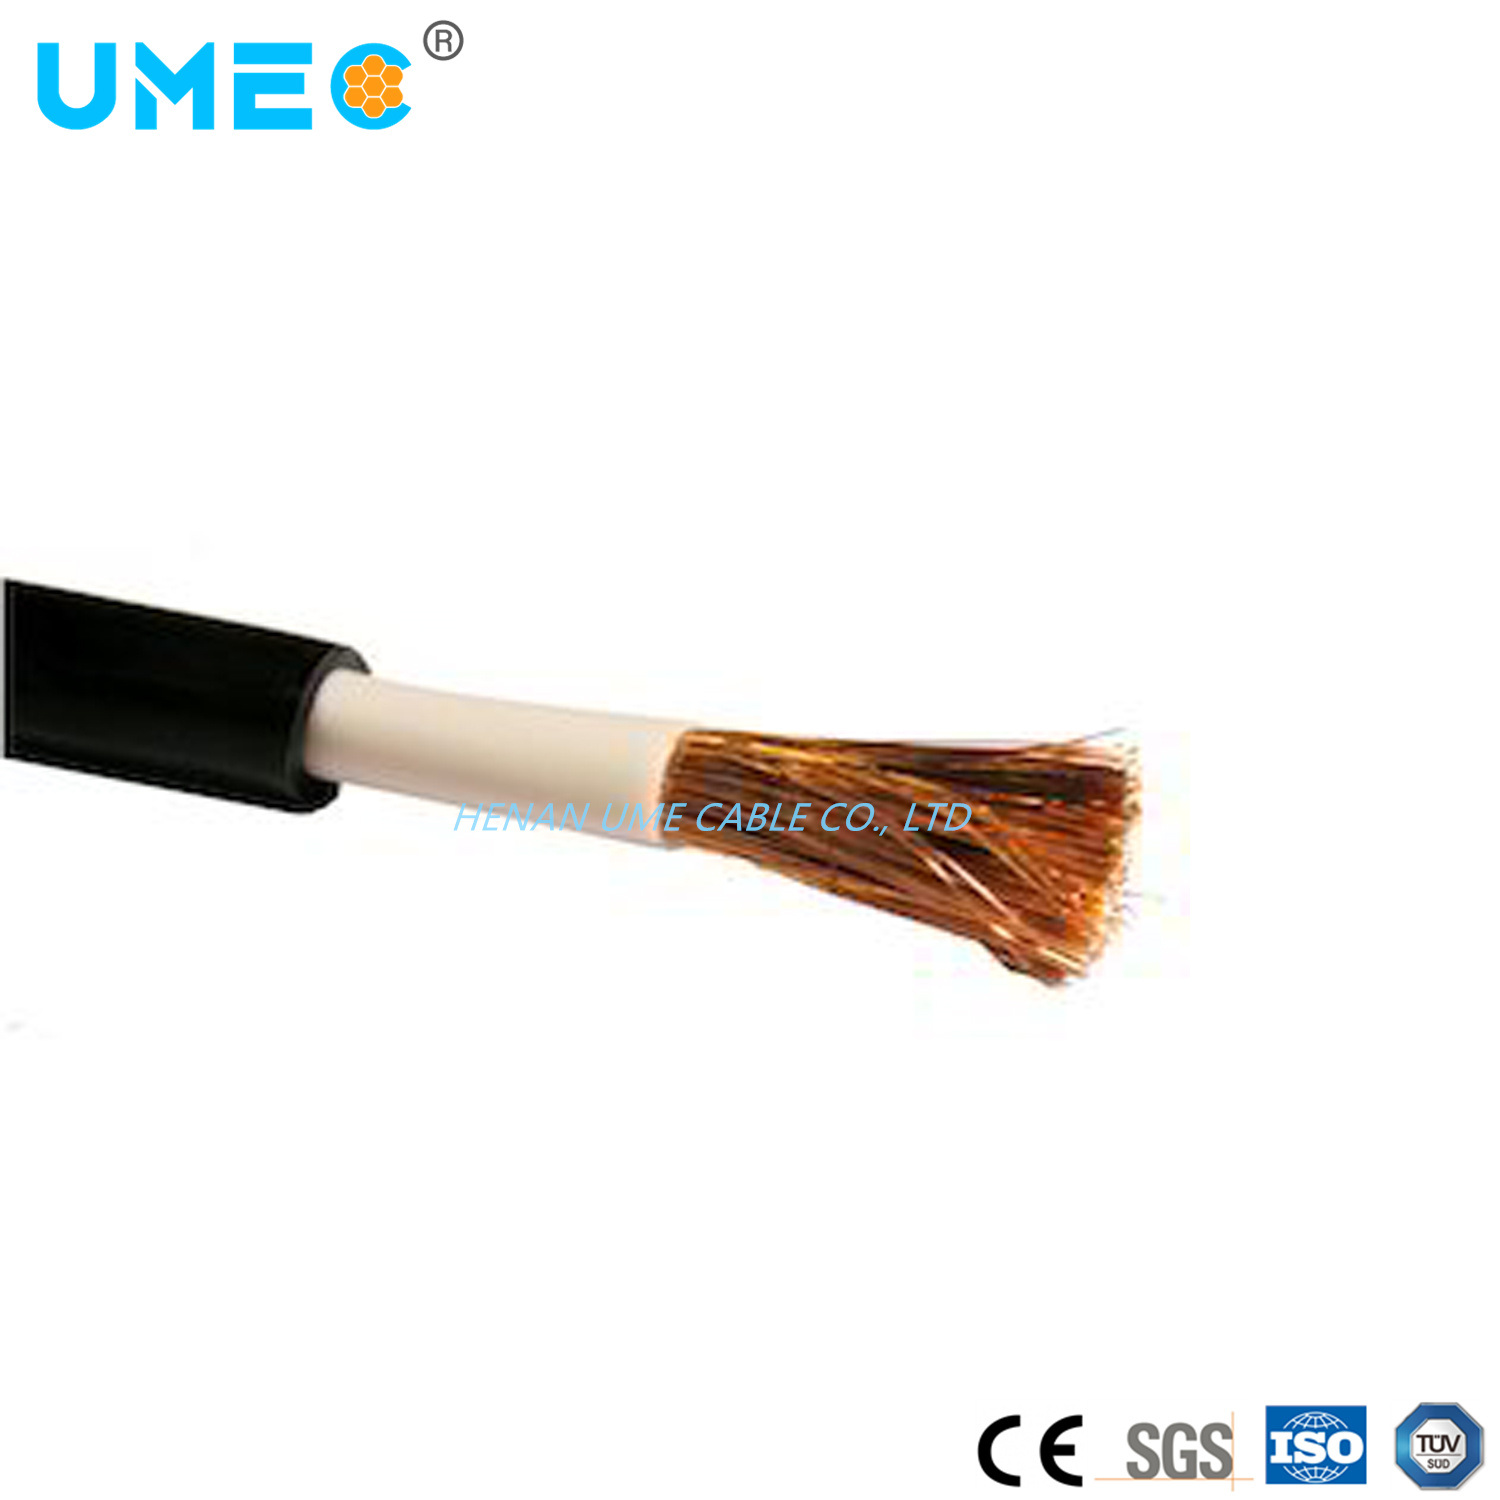 High Quality 1core 2core Aluminum Alloy or Copper Conductor Rubber Welding Cable for Machines